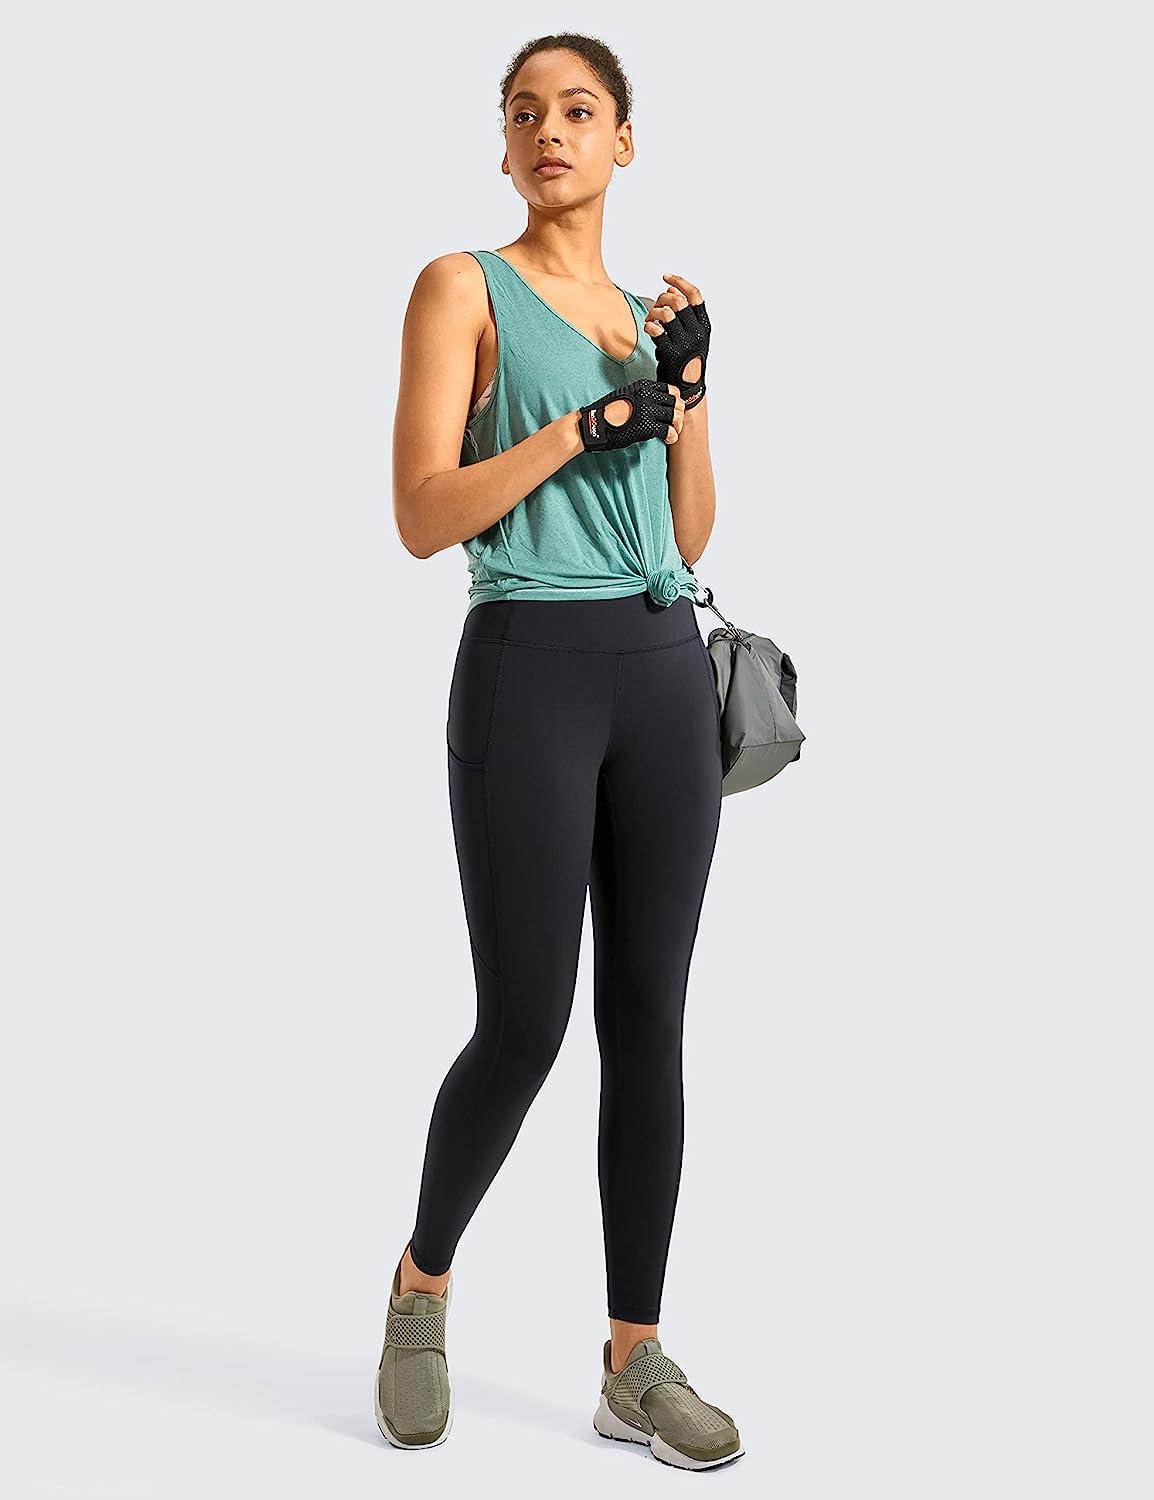 Activewear High Waisted Yoga Pants with Side Pockets - Its All